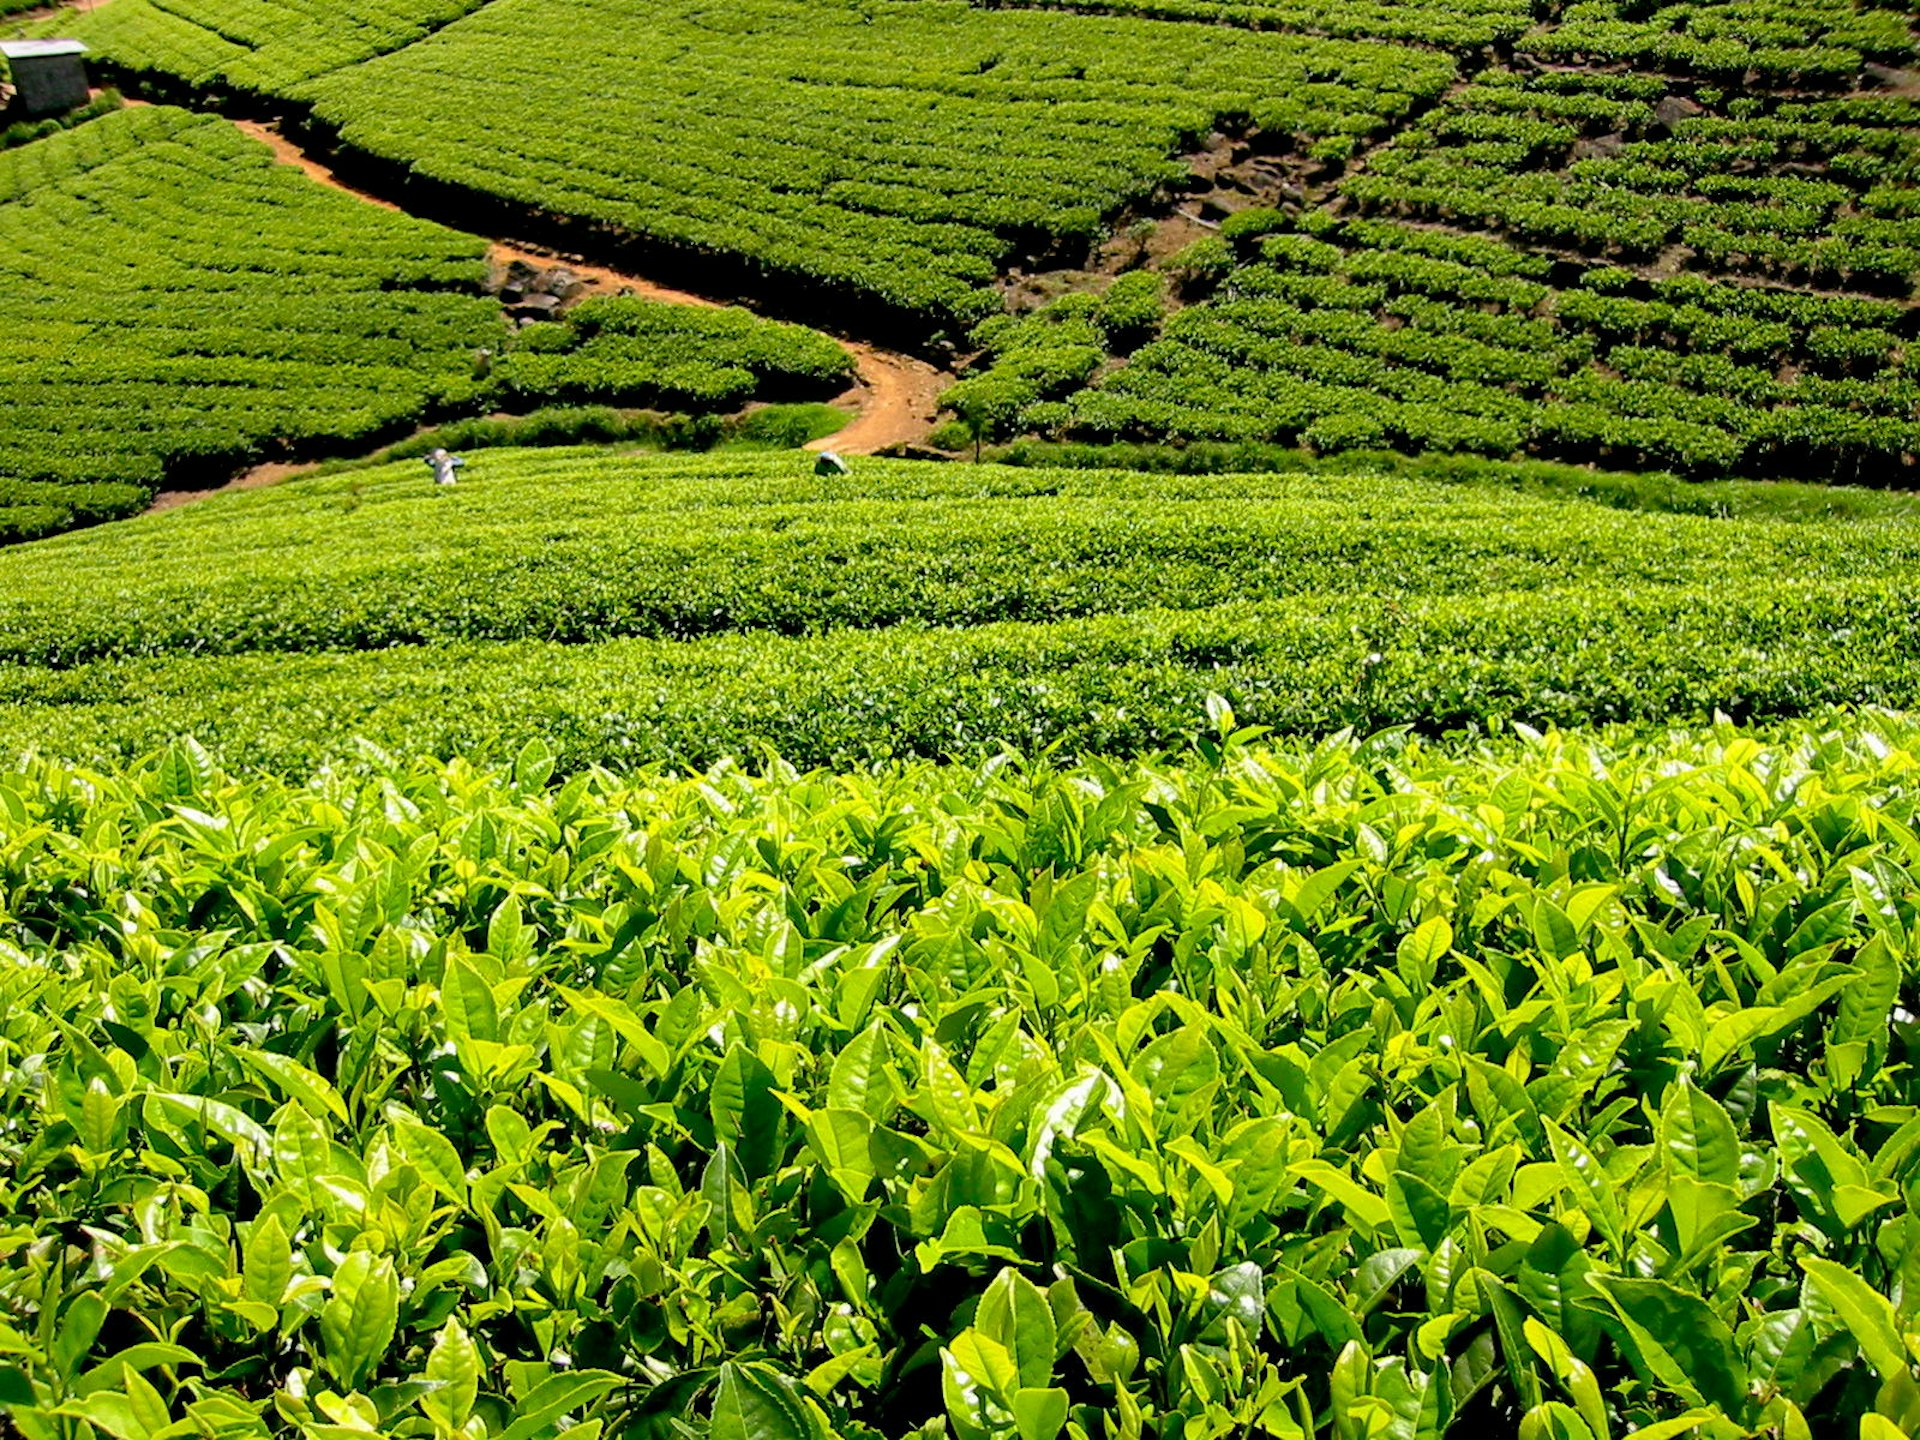 Lipton's sea of green, near Haputale © Ethan Gelber / Lonely Planet